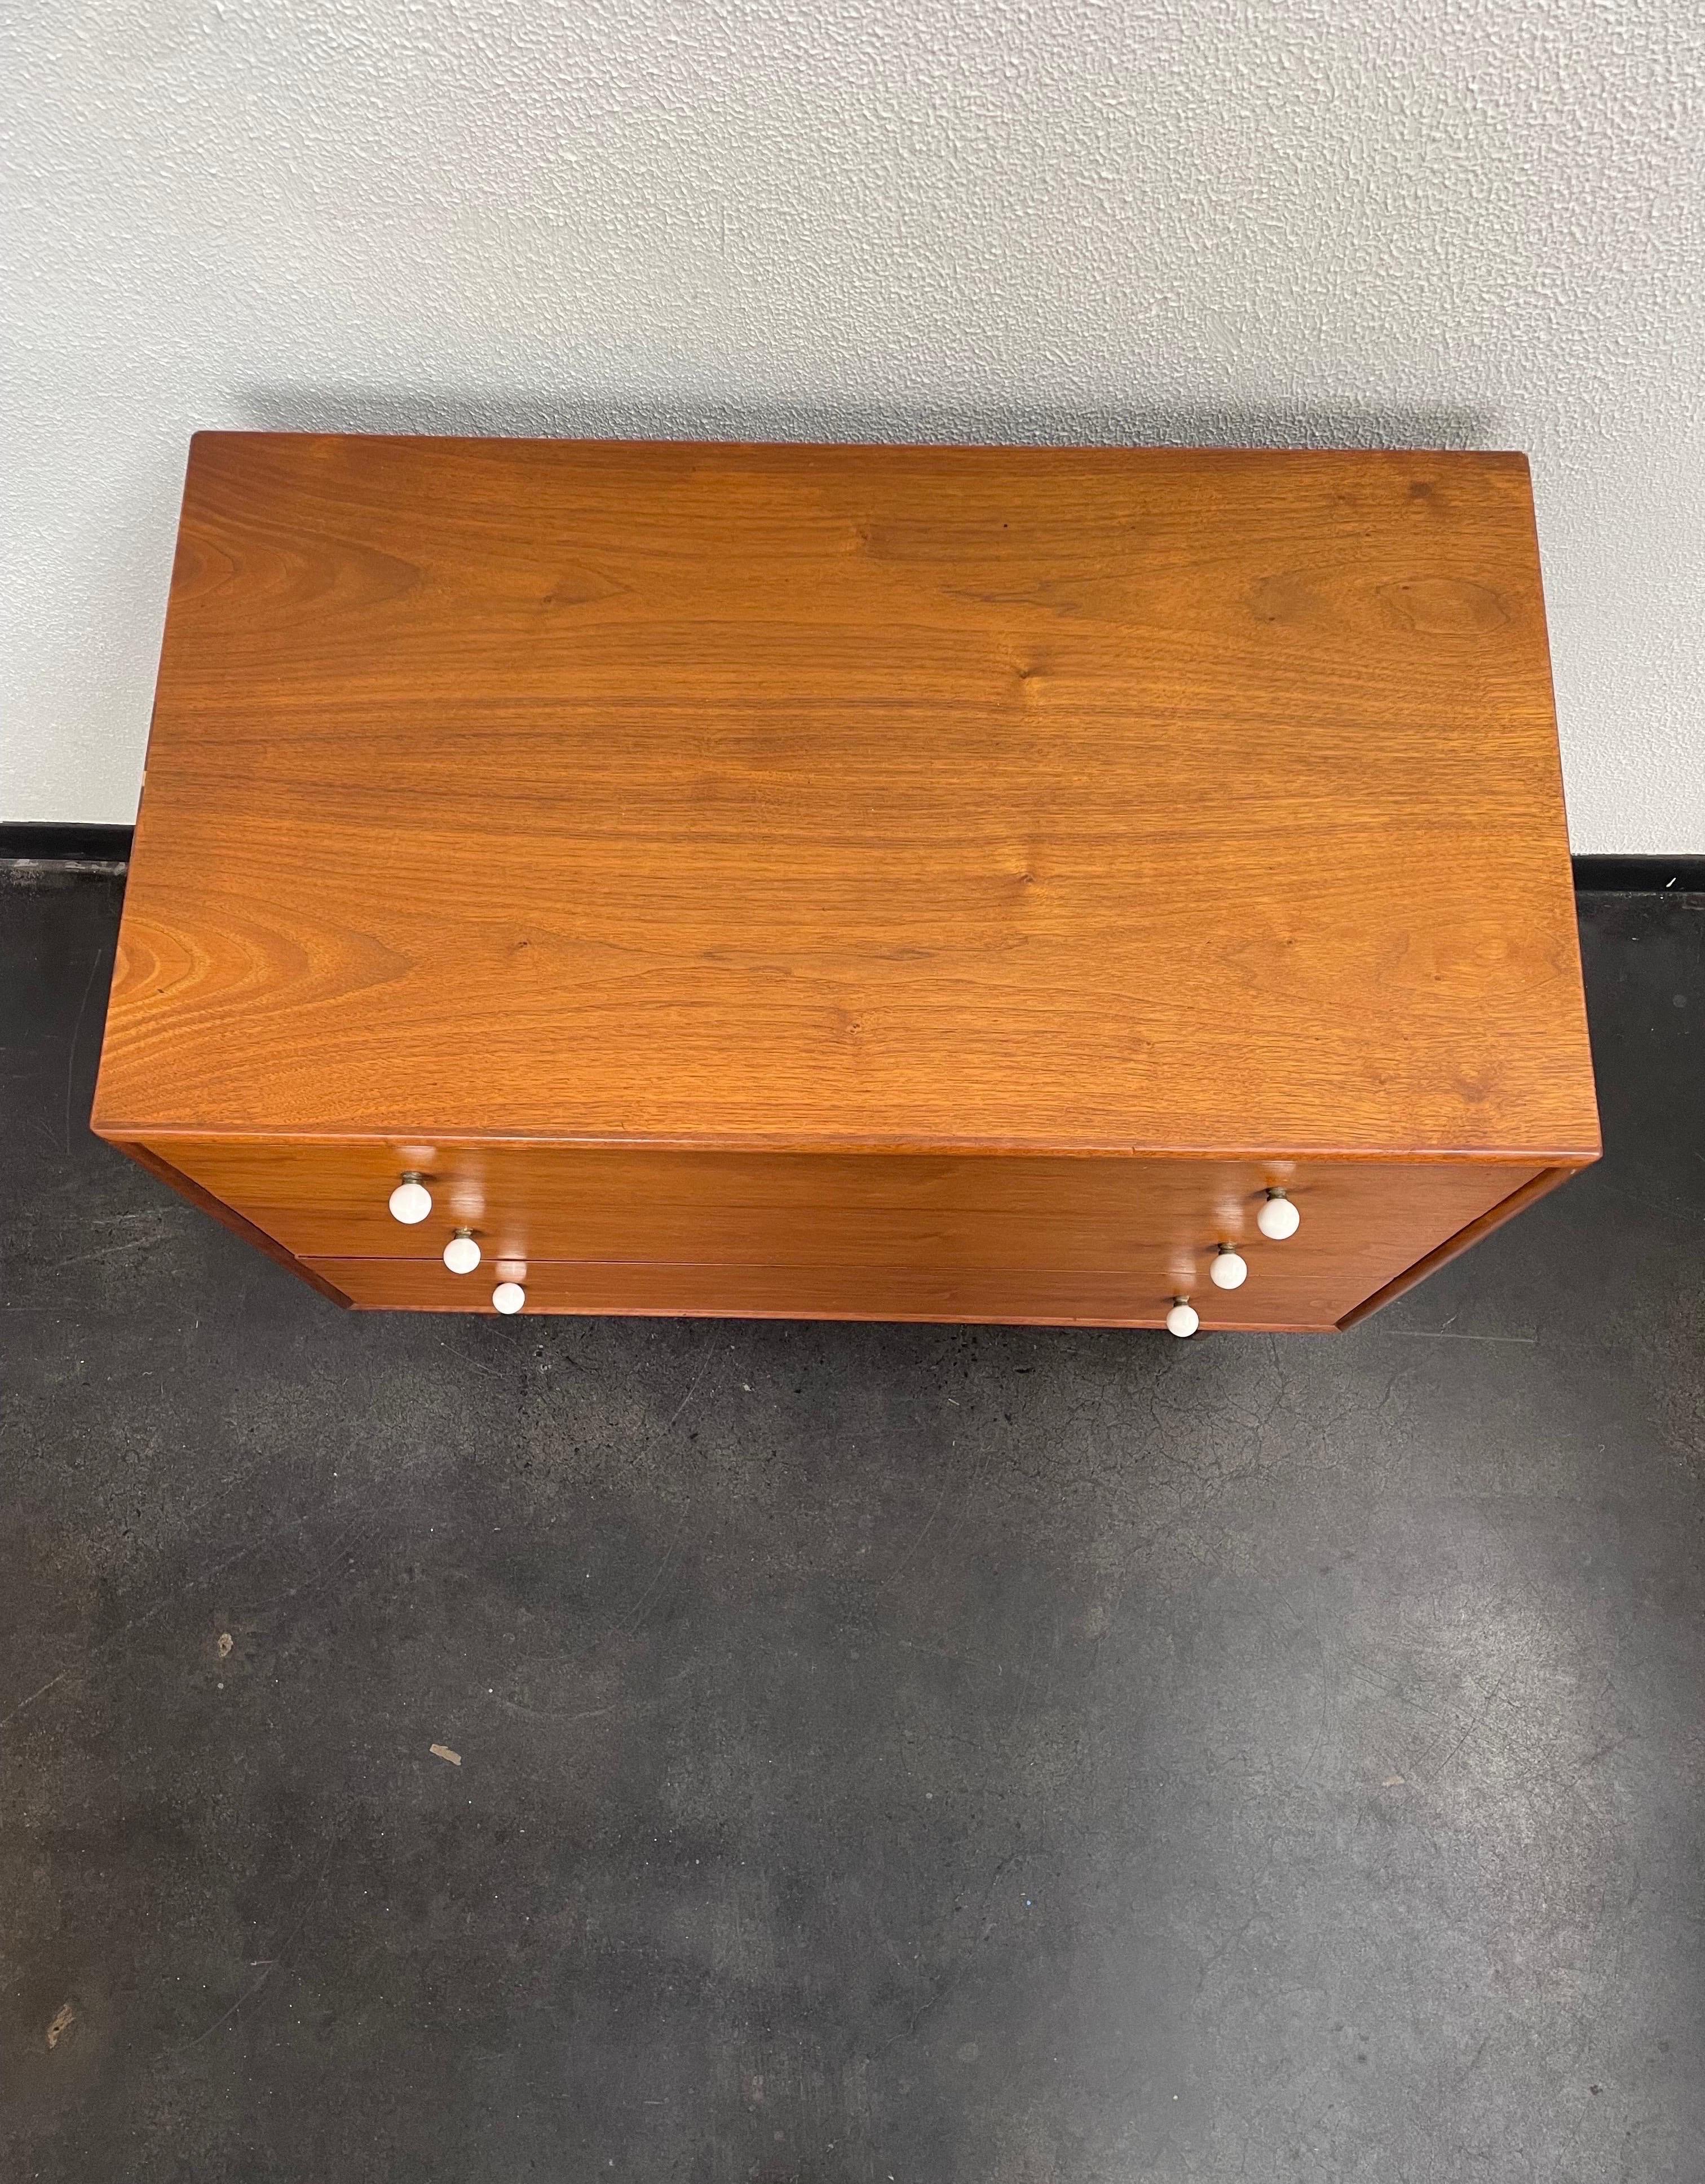 Vintage Mid-Century Modern chest/dresser. This beautiful walnut wood dresser is designed by Kipp Stewart for Drexel and features three drawers with the original porcelain knobs.